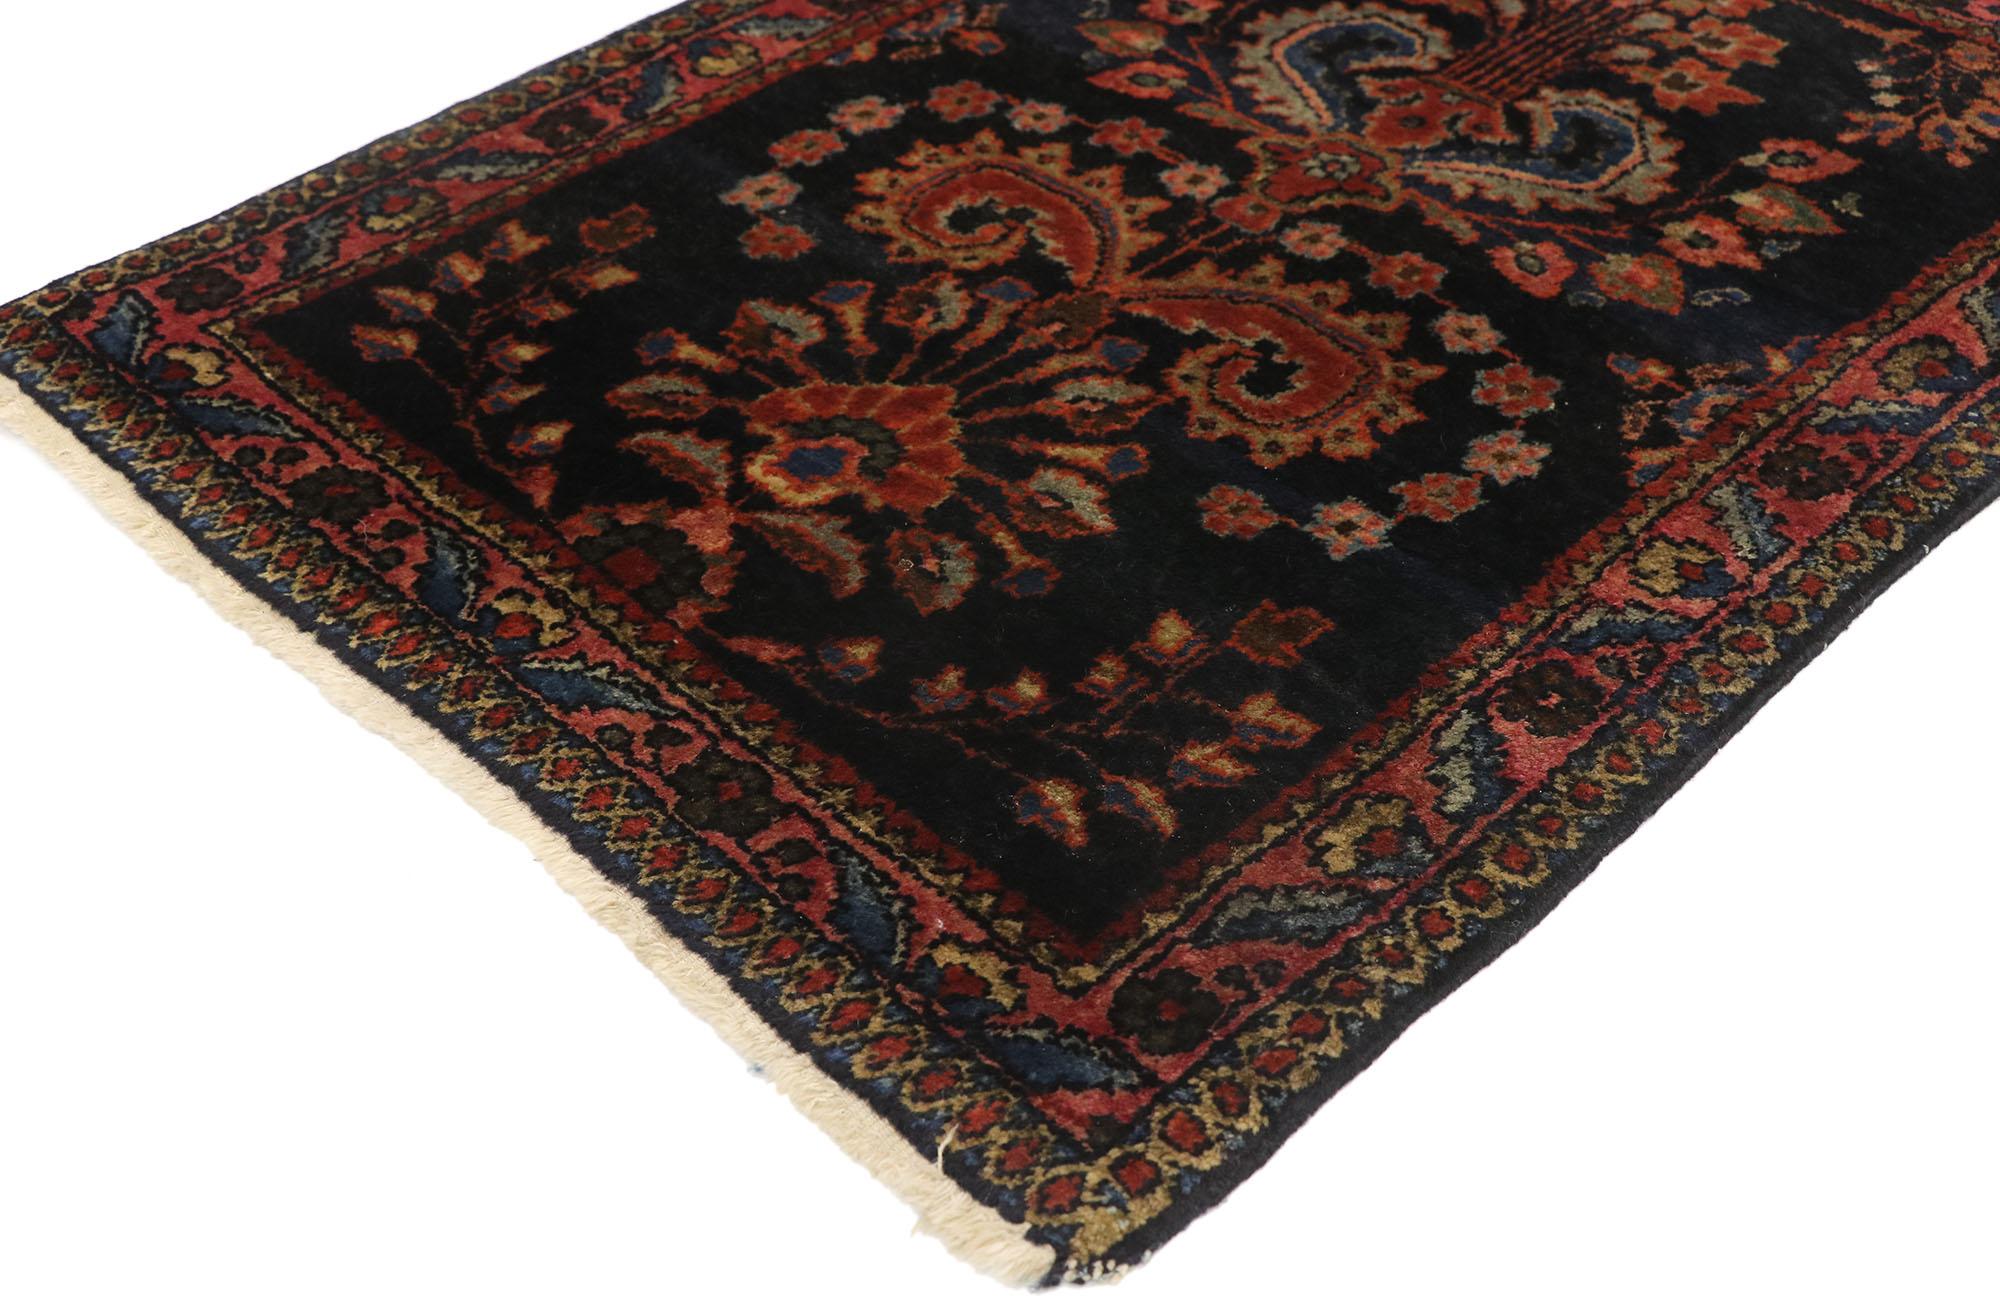 77425 Antique Persian Mohajeran Sarouk Rug with Old World Victorian Style 01'11 x 02'07. Regal and refined with a timeless design, this hand-knotted wool antique Persian Mohajeran Sarouk rug is poised to impress. The abrashed midnight ink blue field